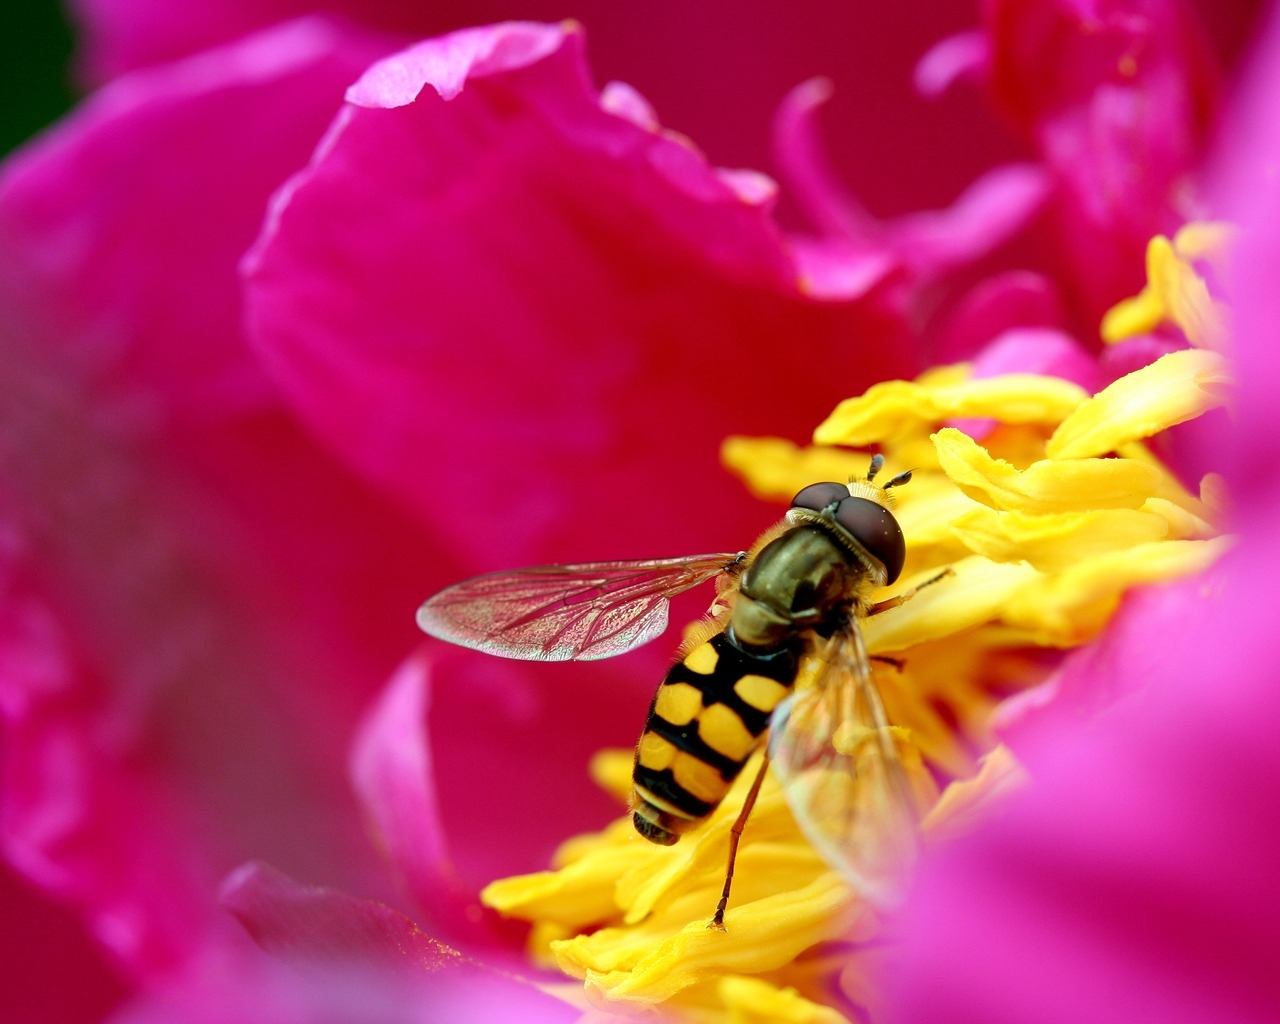 Syrphid Fly for 1280 x 1024 resolution